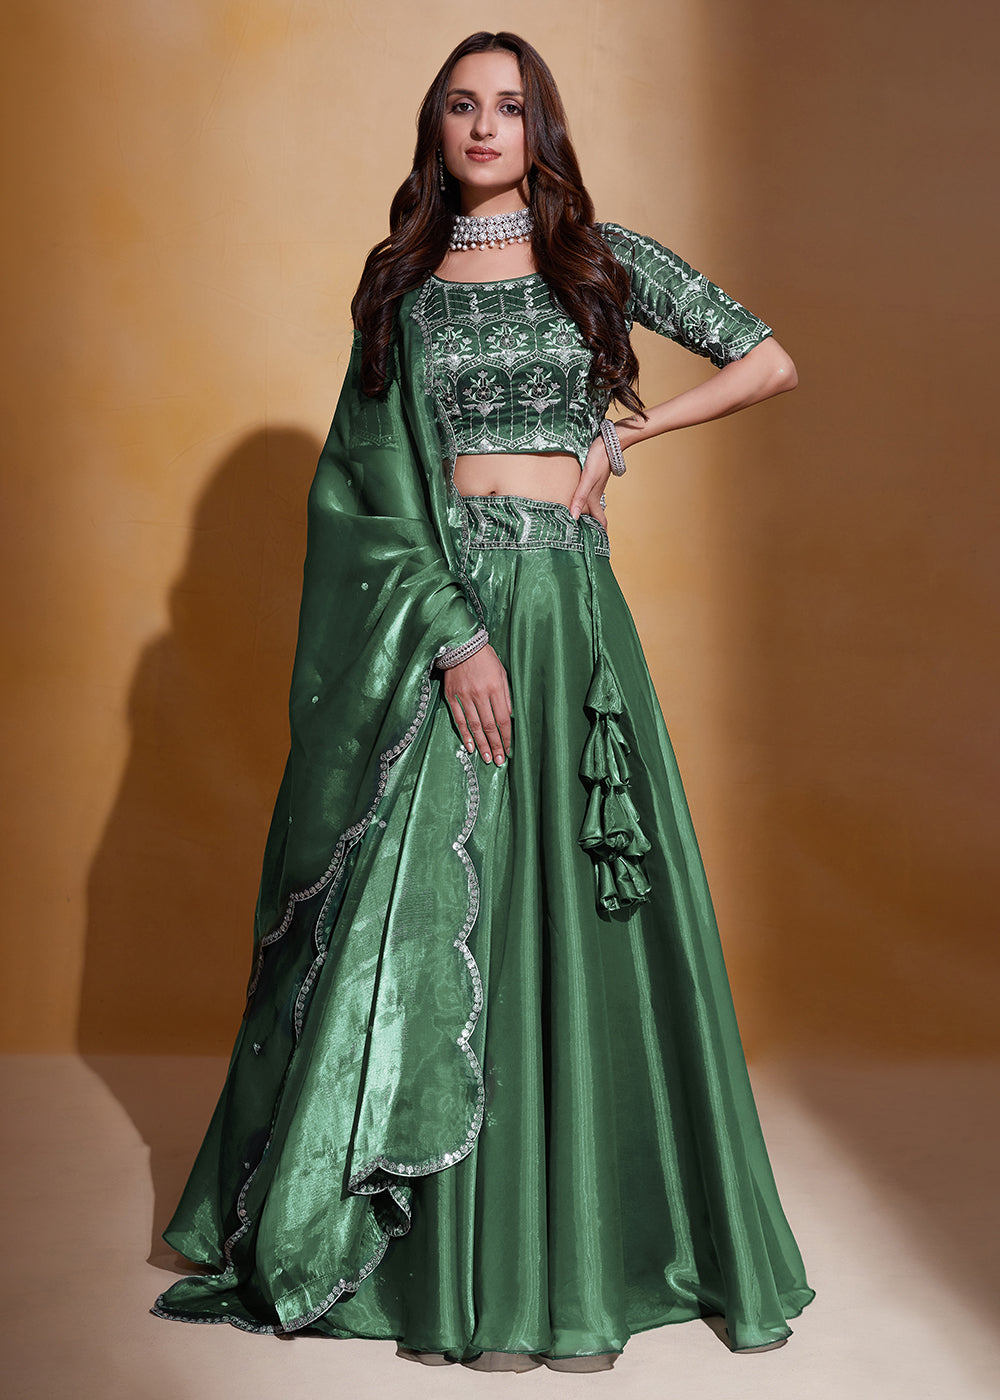 Buy Now Green Organza Silk A Line Festive Party Lehenga Choli Online in USA, UK, Canada & Worldwide at Empress Clothing. 